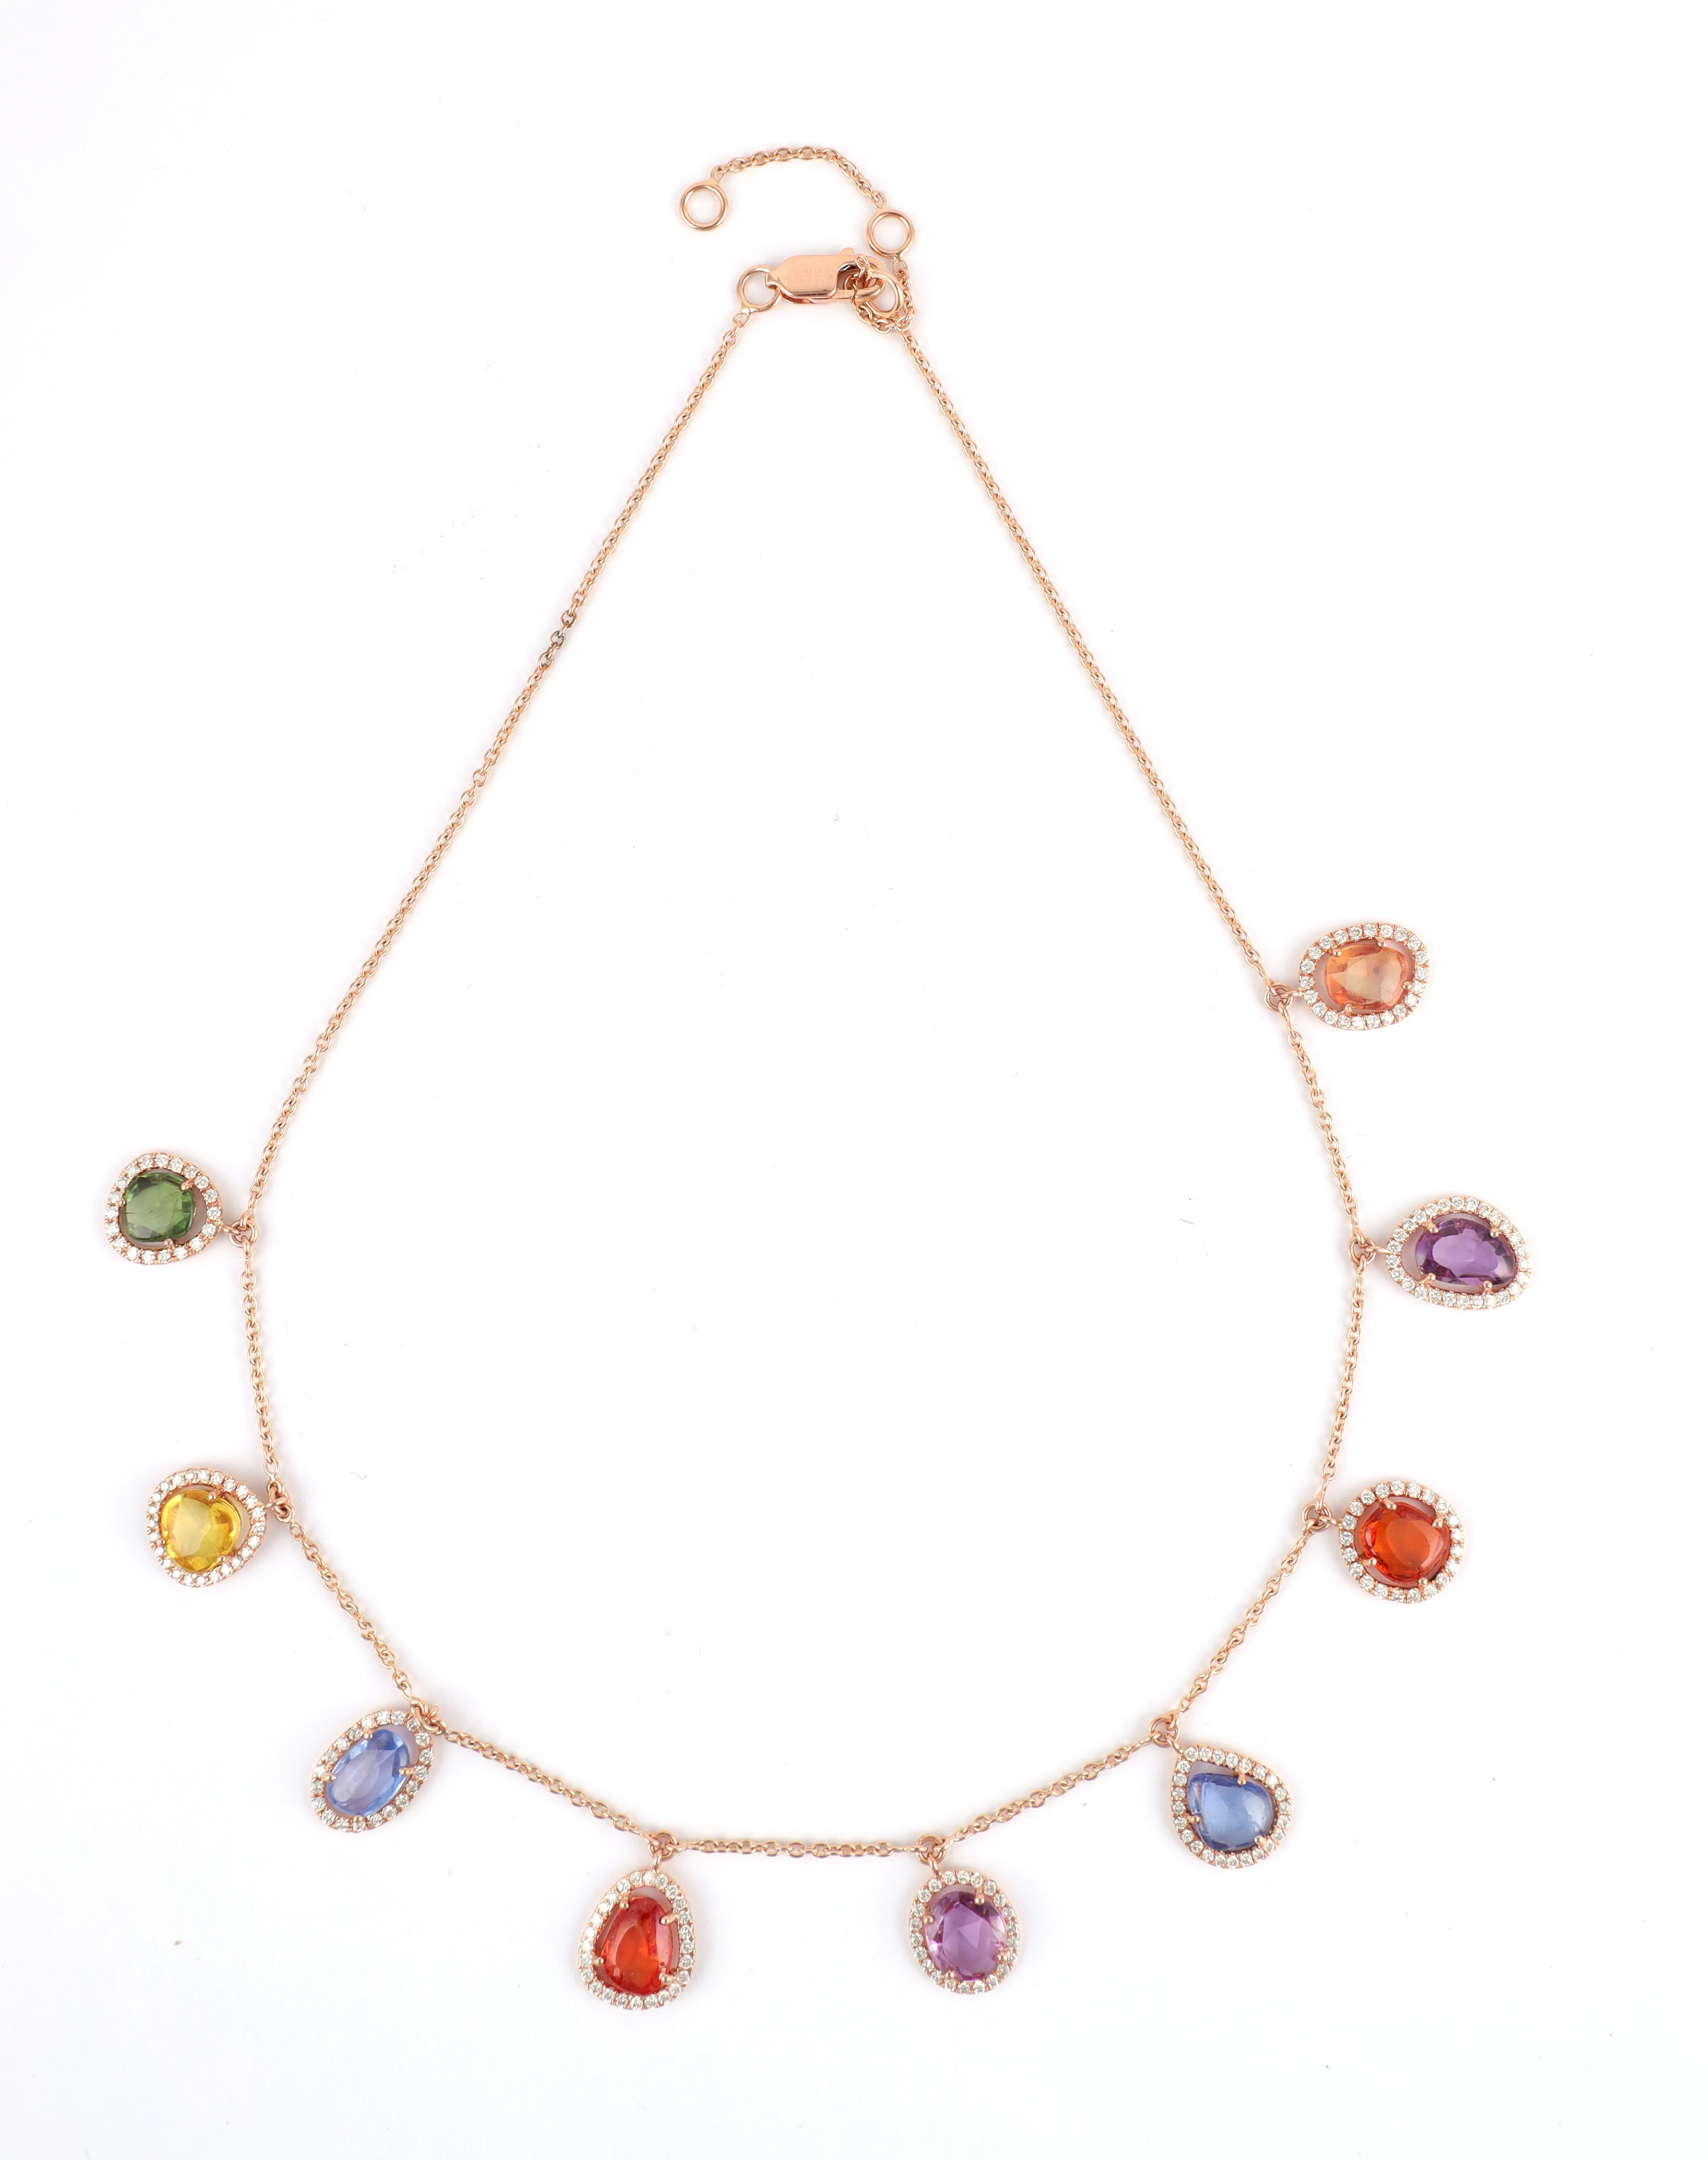 Multi-Colors Rainbow Sapphire Chain Necklace in 18K Rose Gold studded with mix cut sapphire pieces.
Accessorize your look with this elegant Blue sapphire chain necklace. This stunning piece of jewelry instantly elevates a casual look or dressy